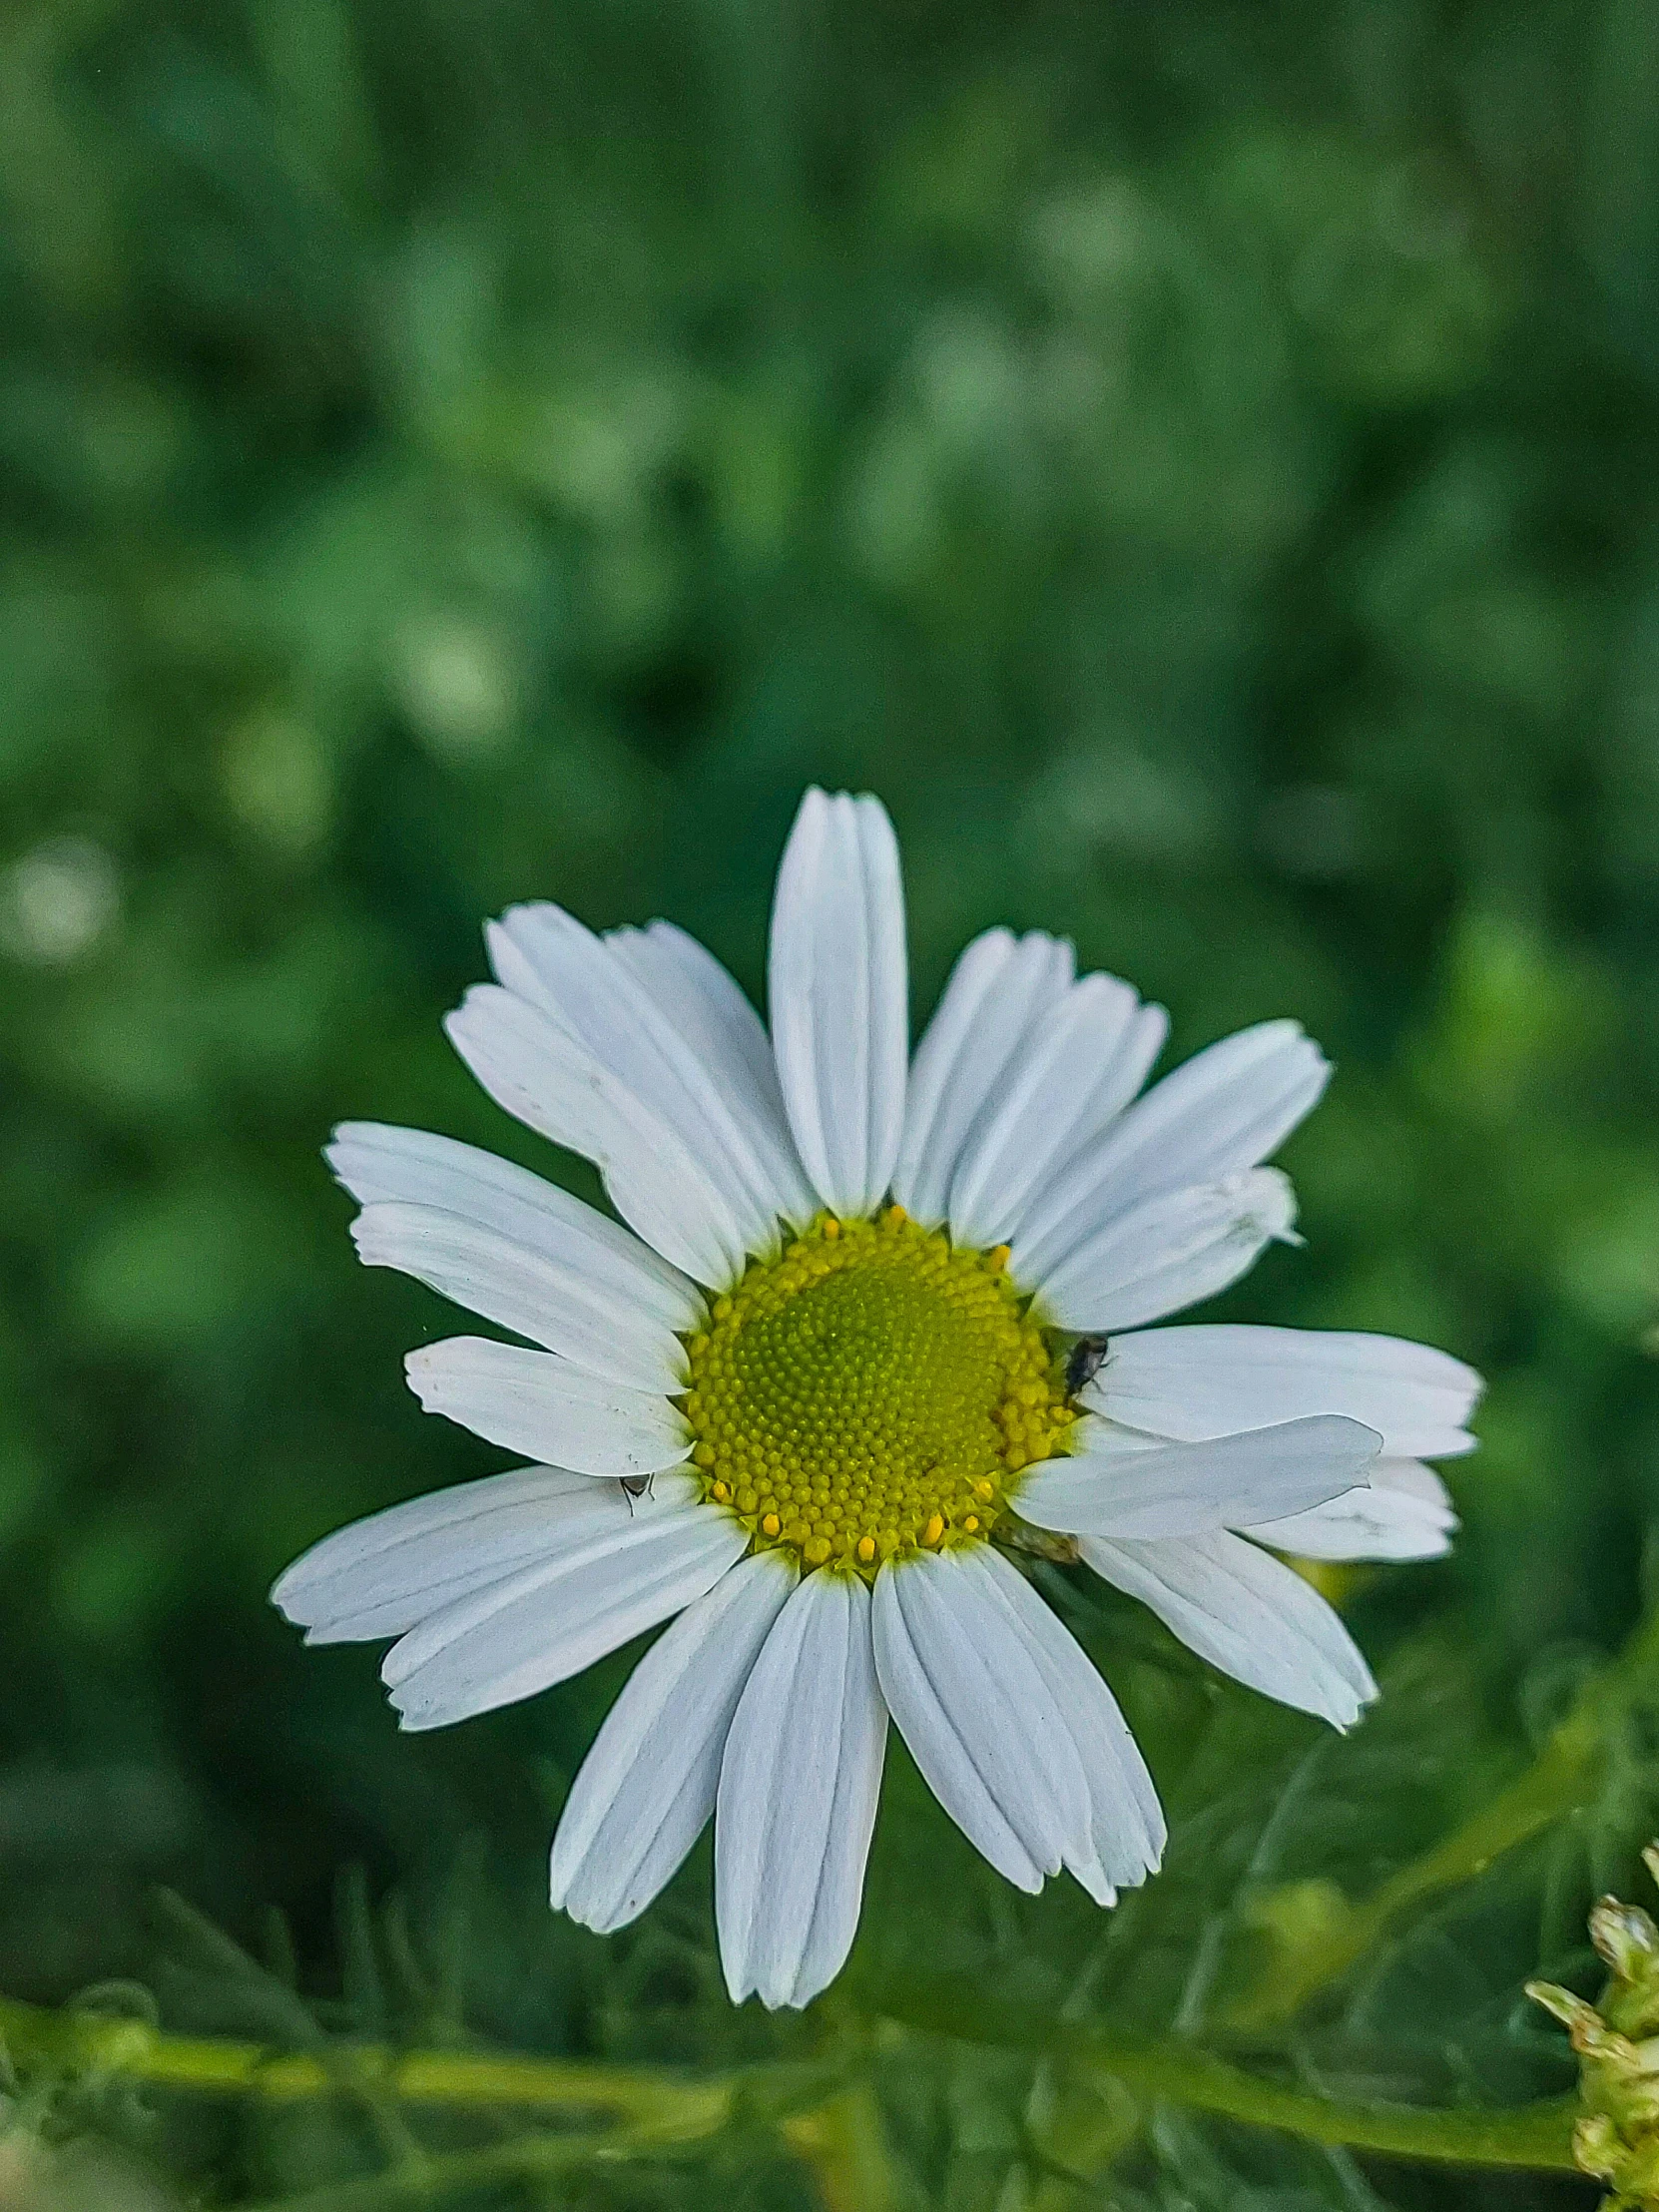 white daisy standing on green stem with blurred background